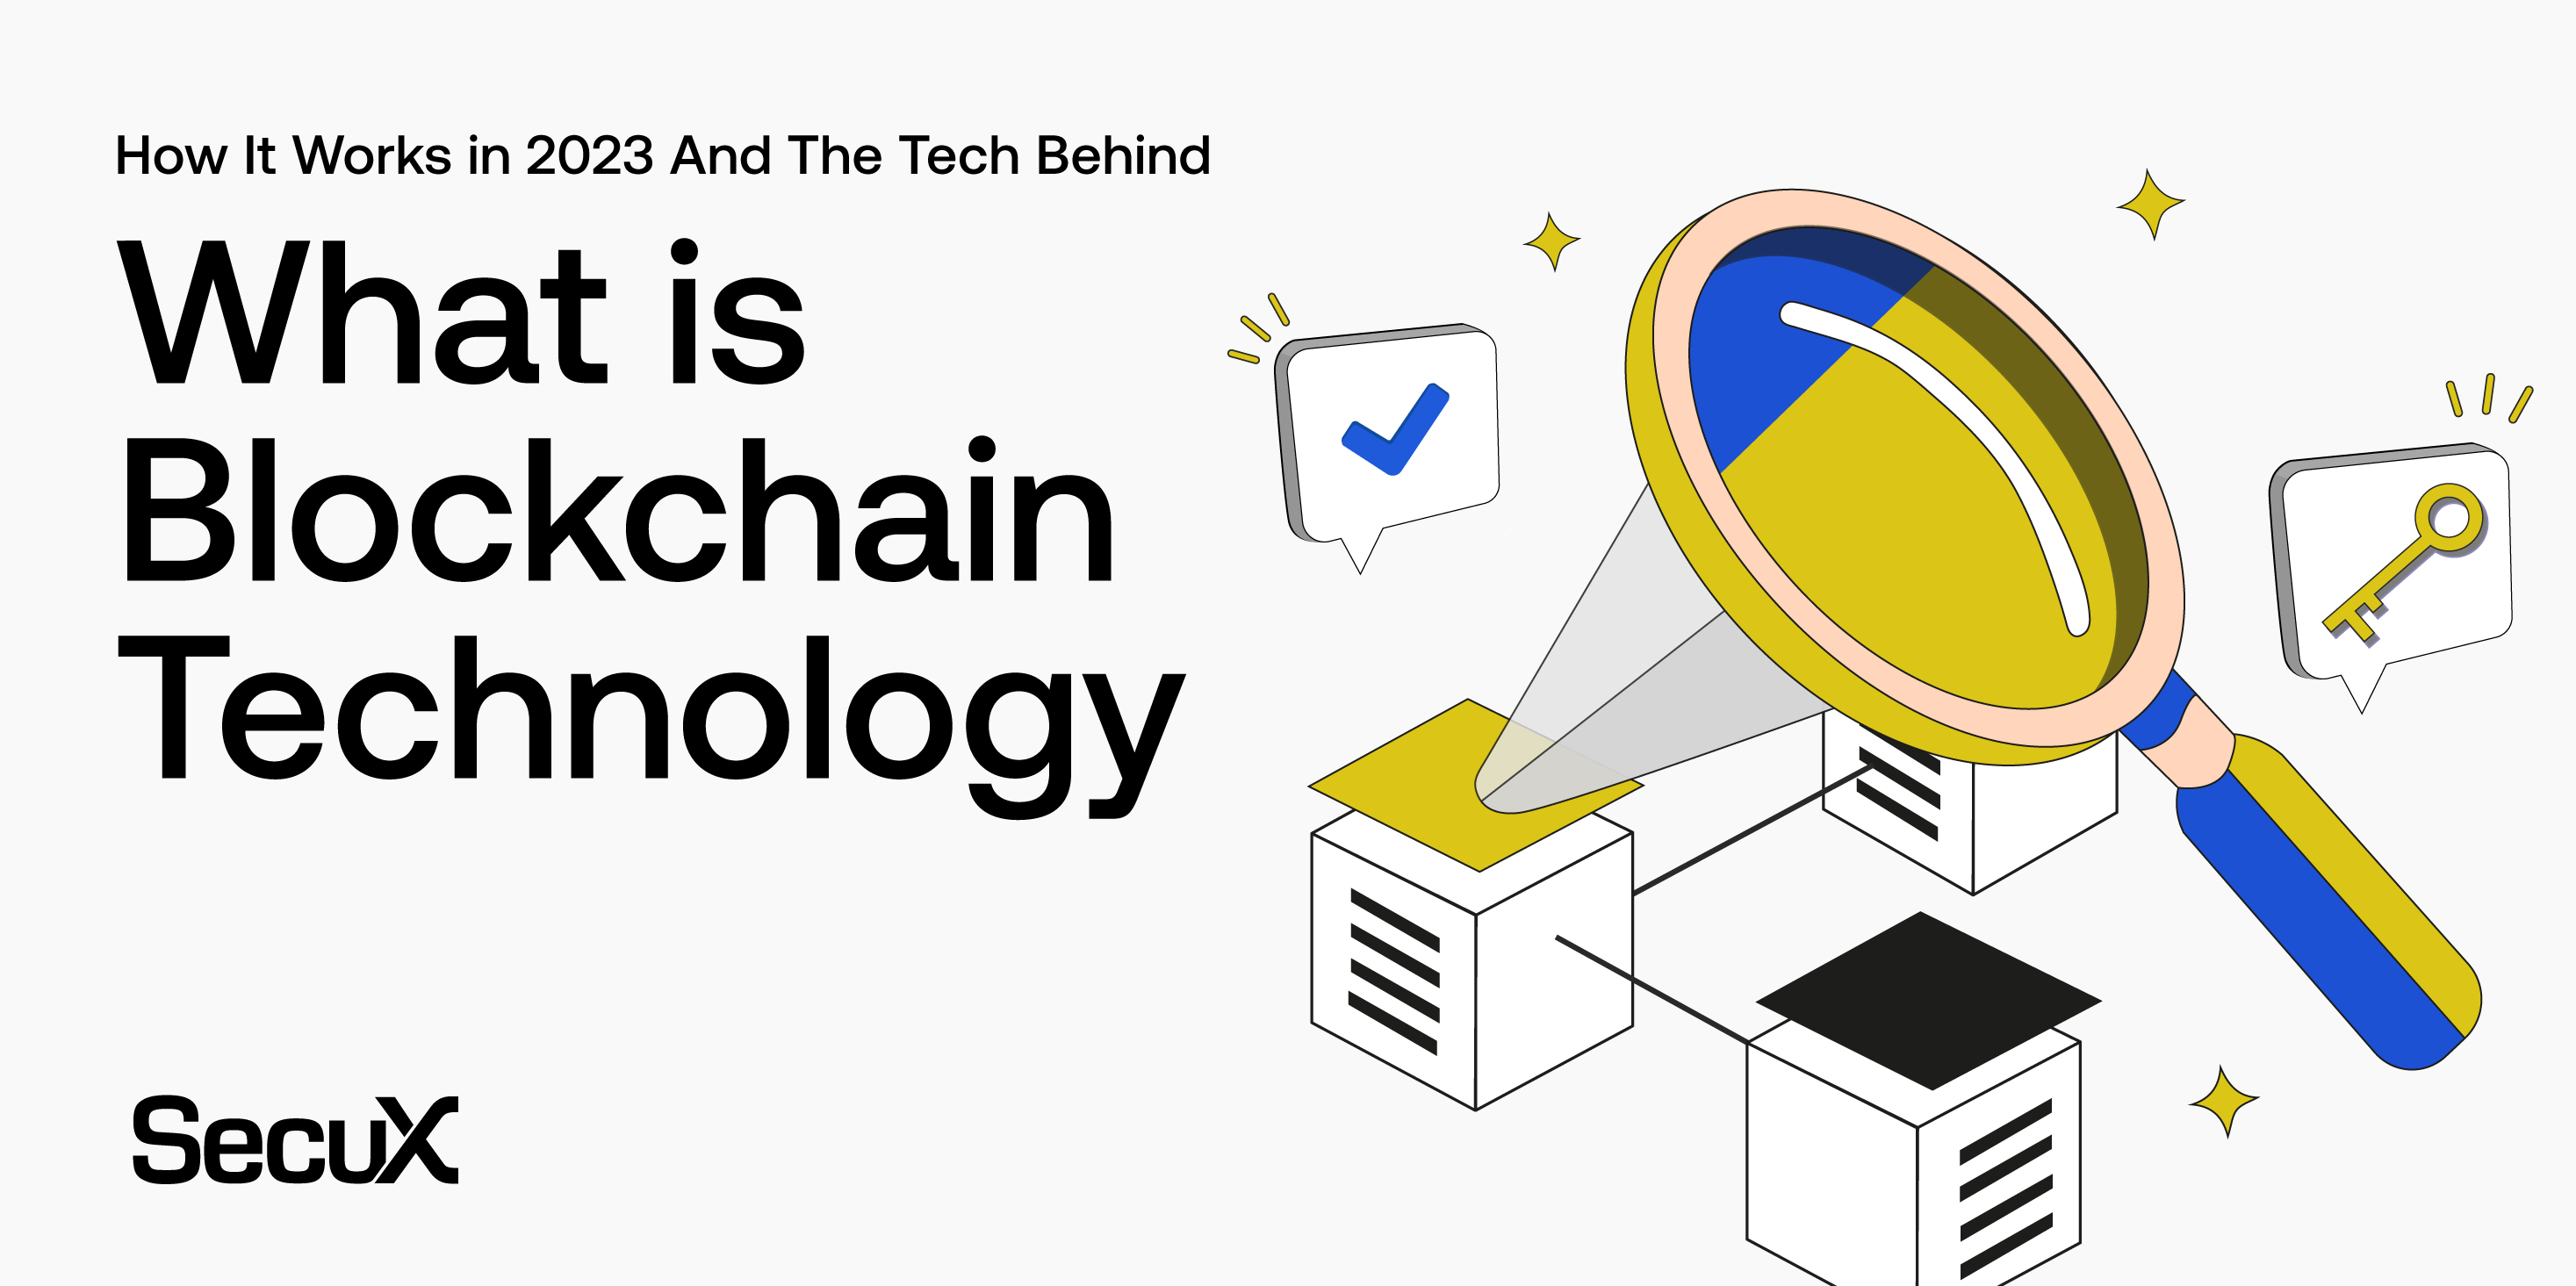 What Are Blockchains and the Tech Behind Them?